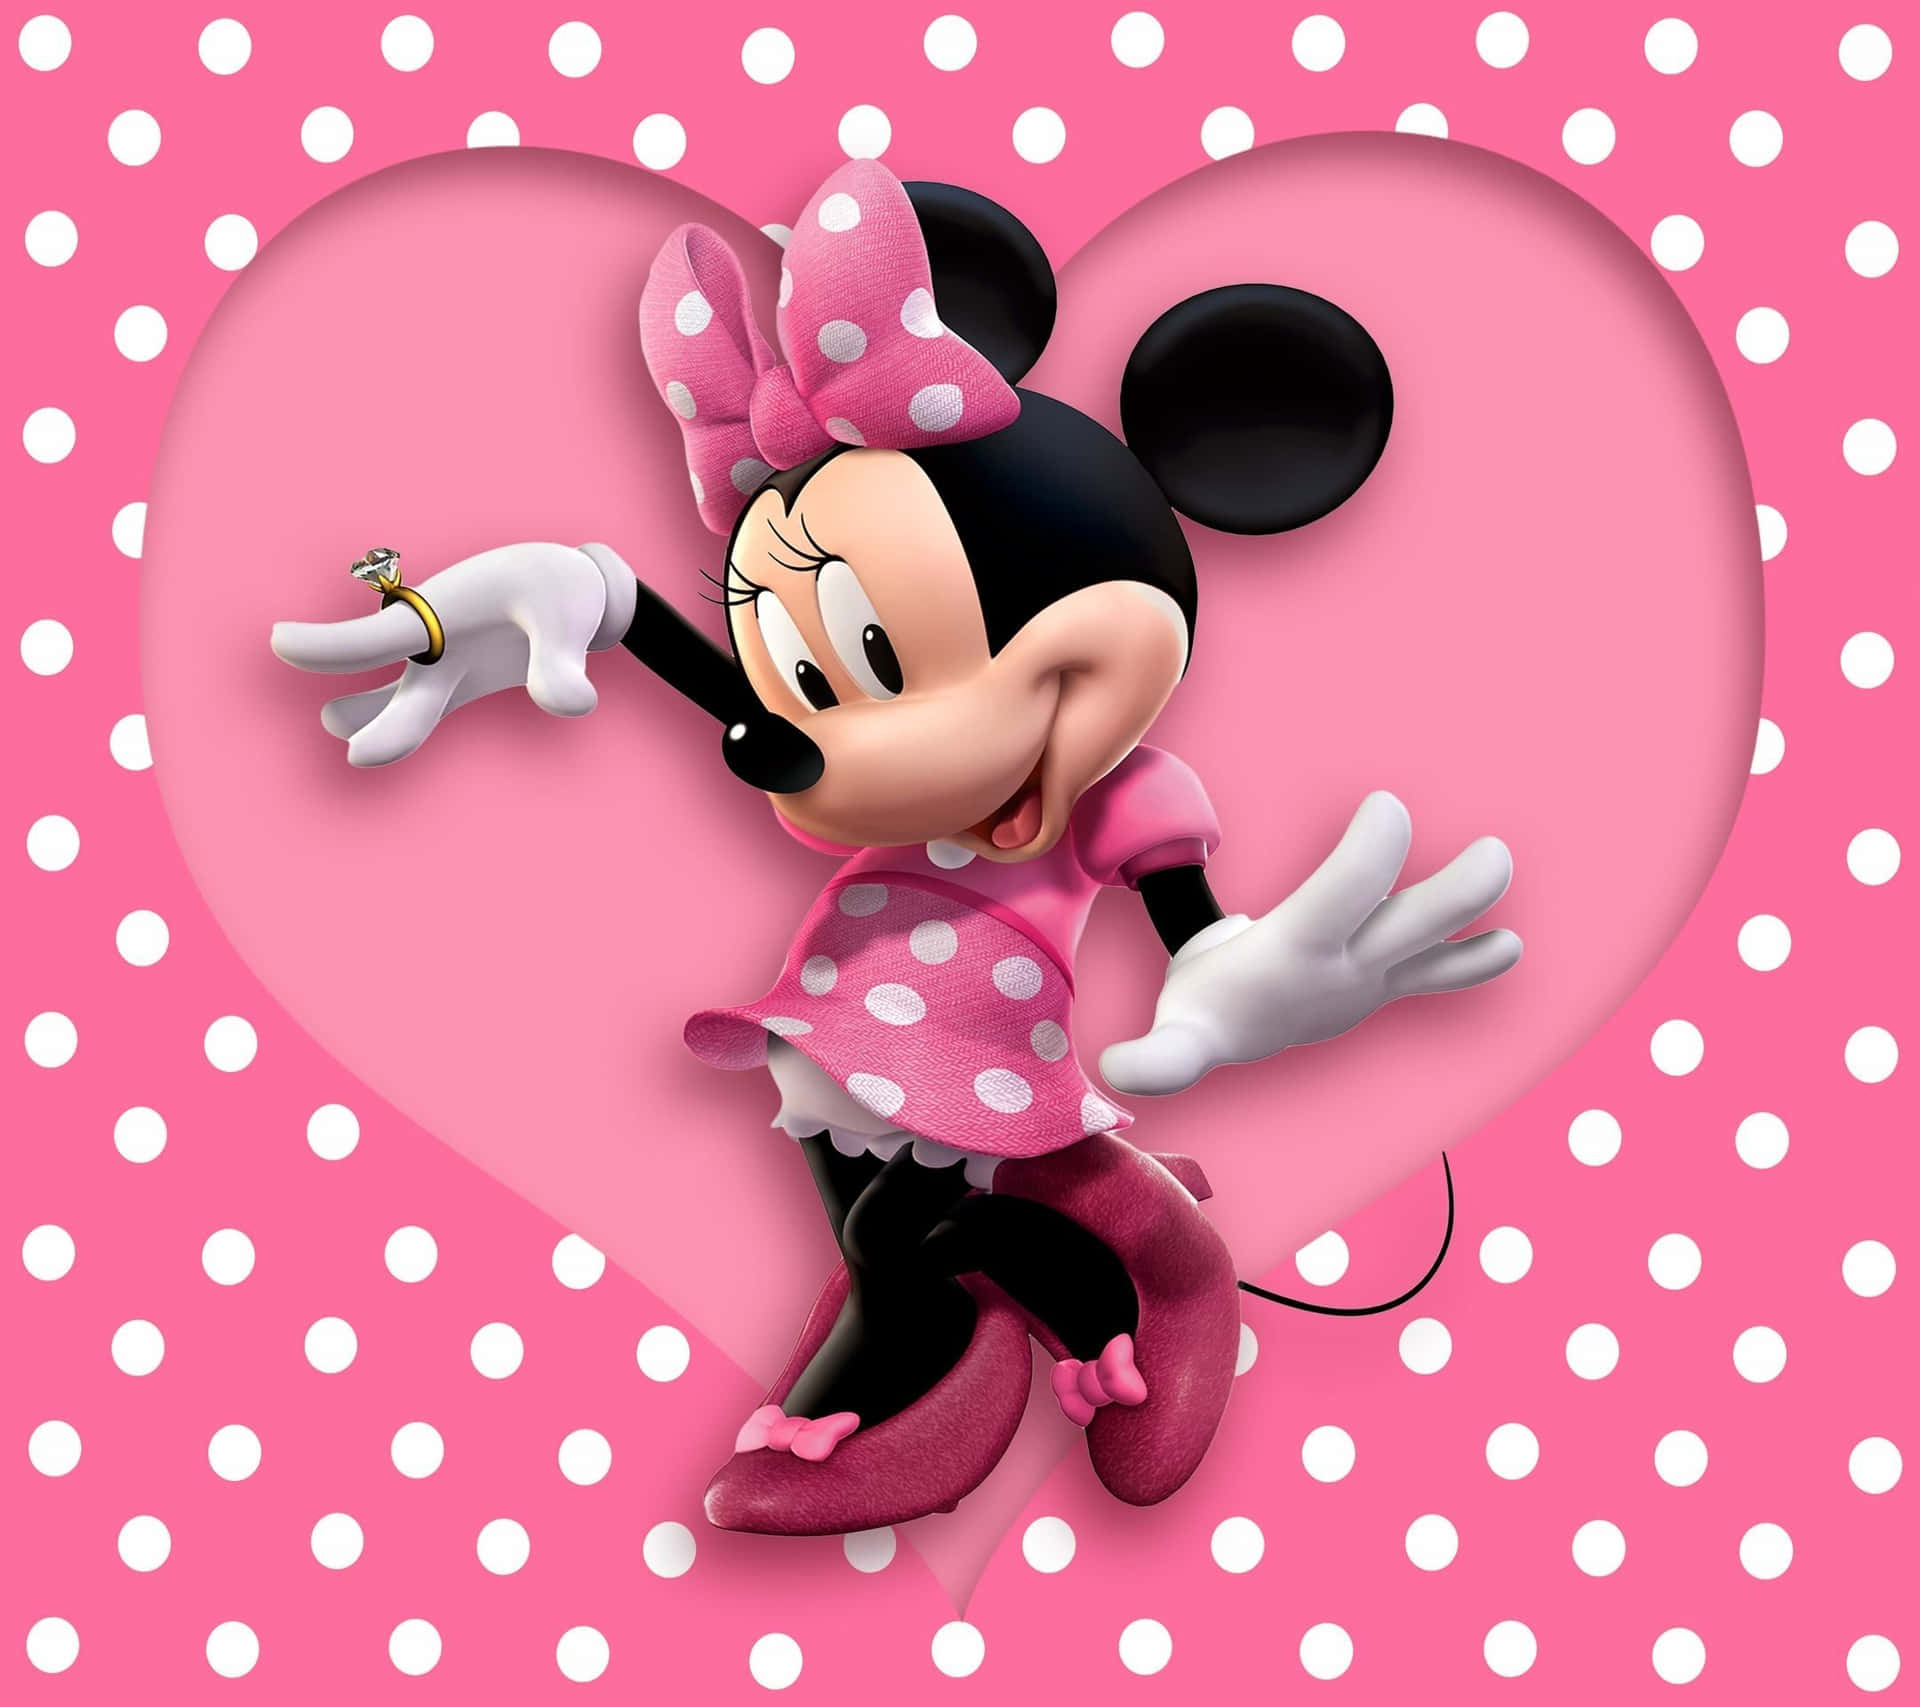 Enjoy life's little joys with Minnie Mouse Pink! Wallpaper